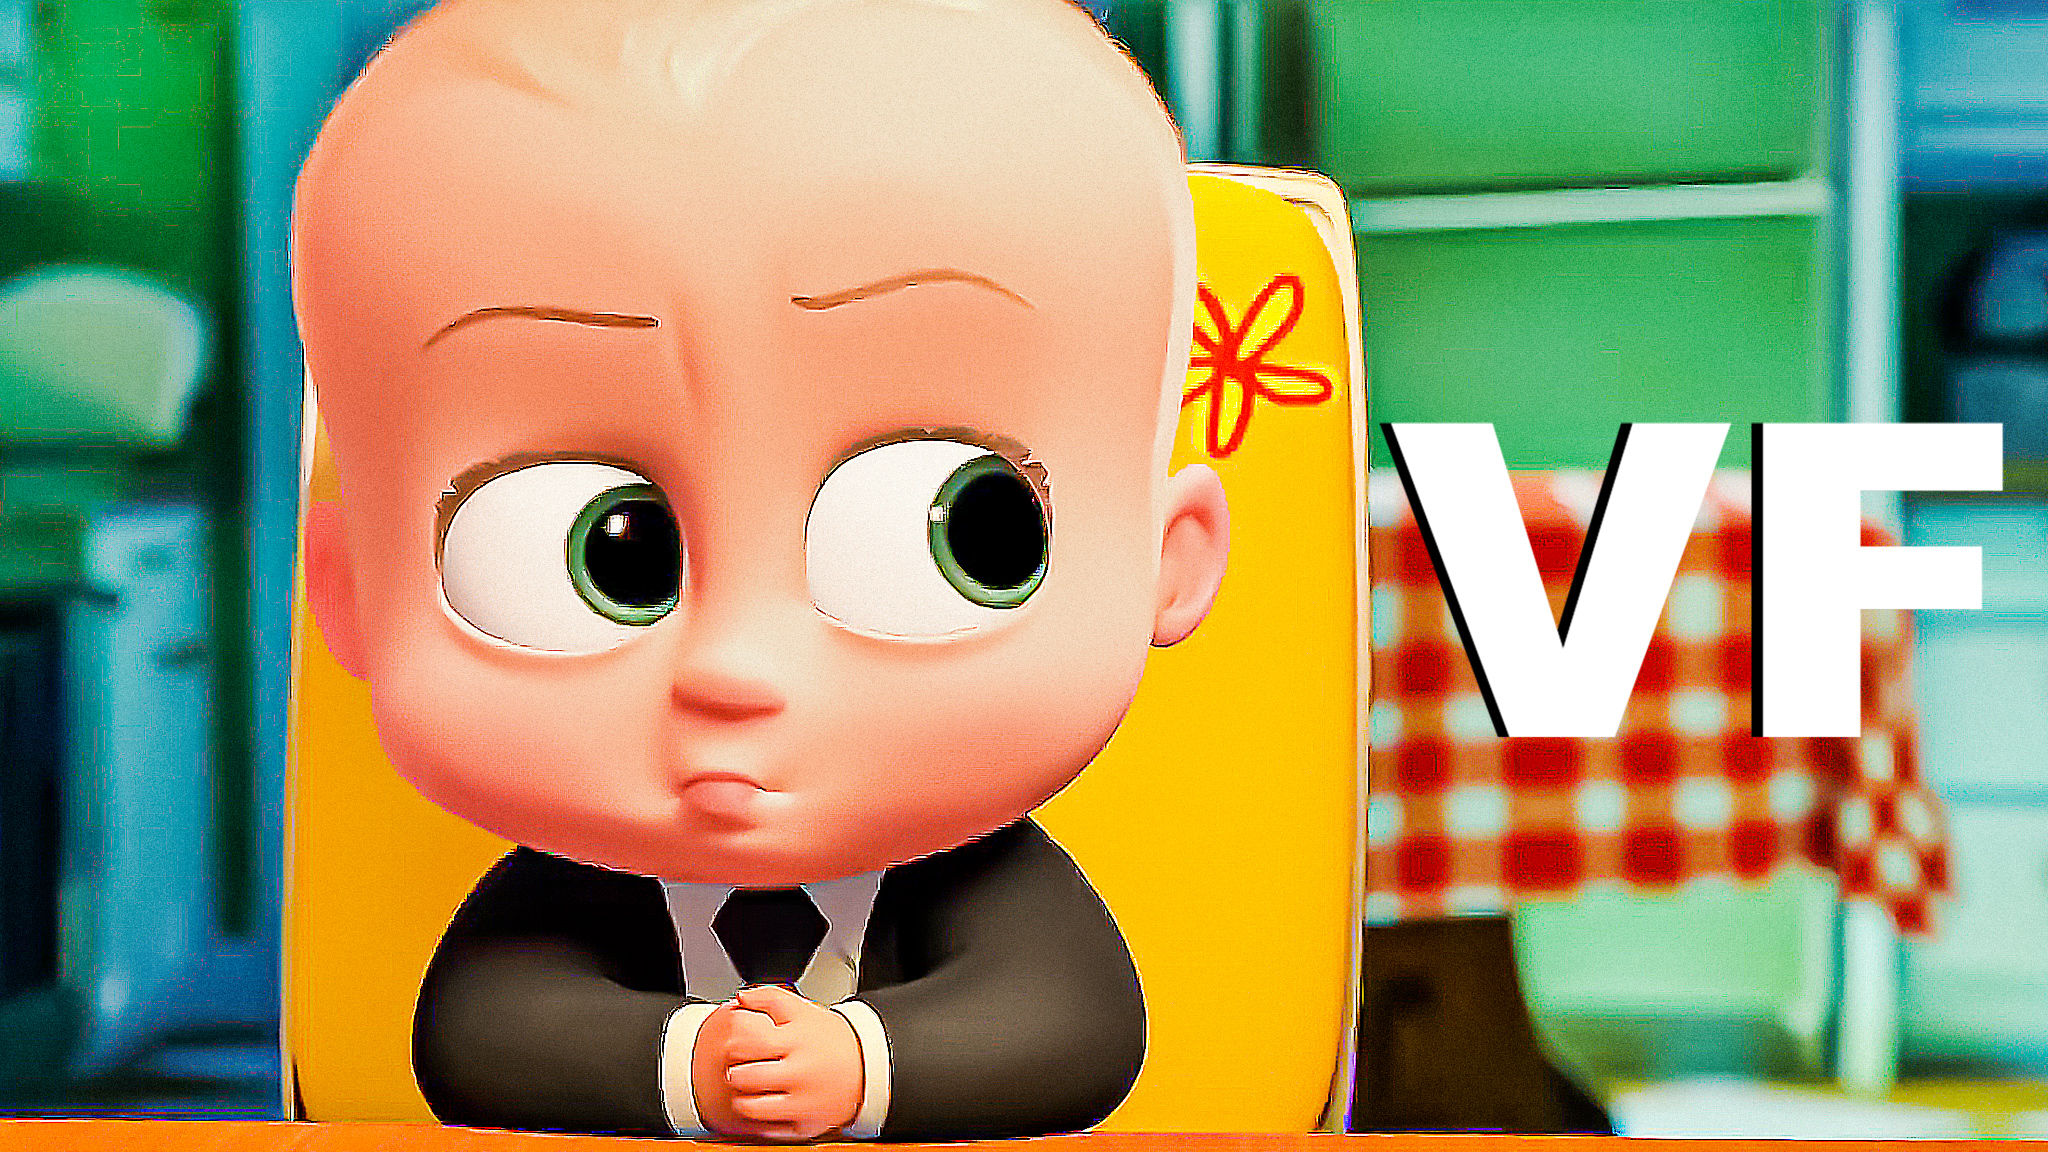 Boss baby movie 2 - toyslew